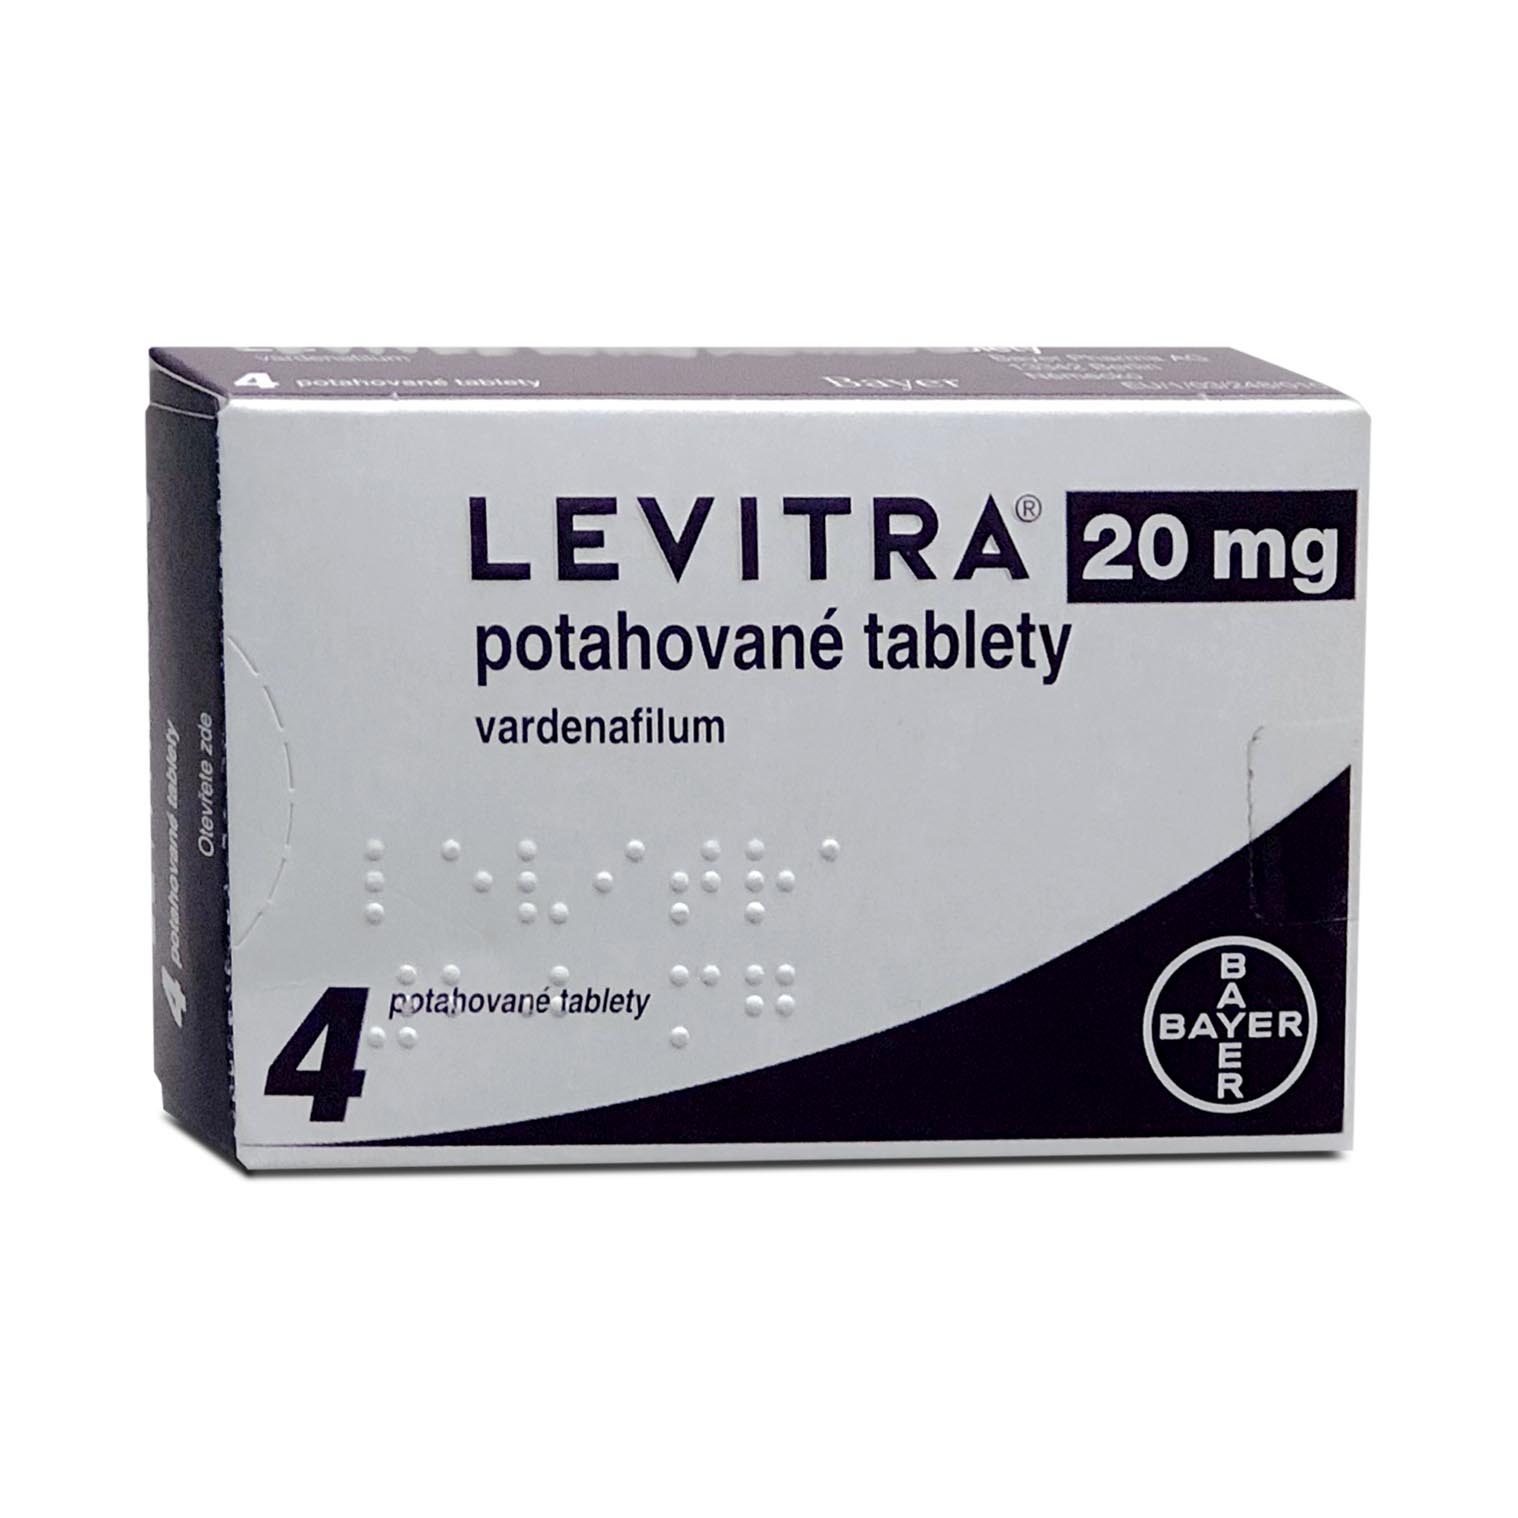 Levitra 20mg 4 tablets Bayer Pharmaceuticals